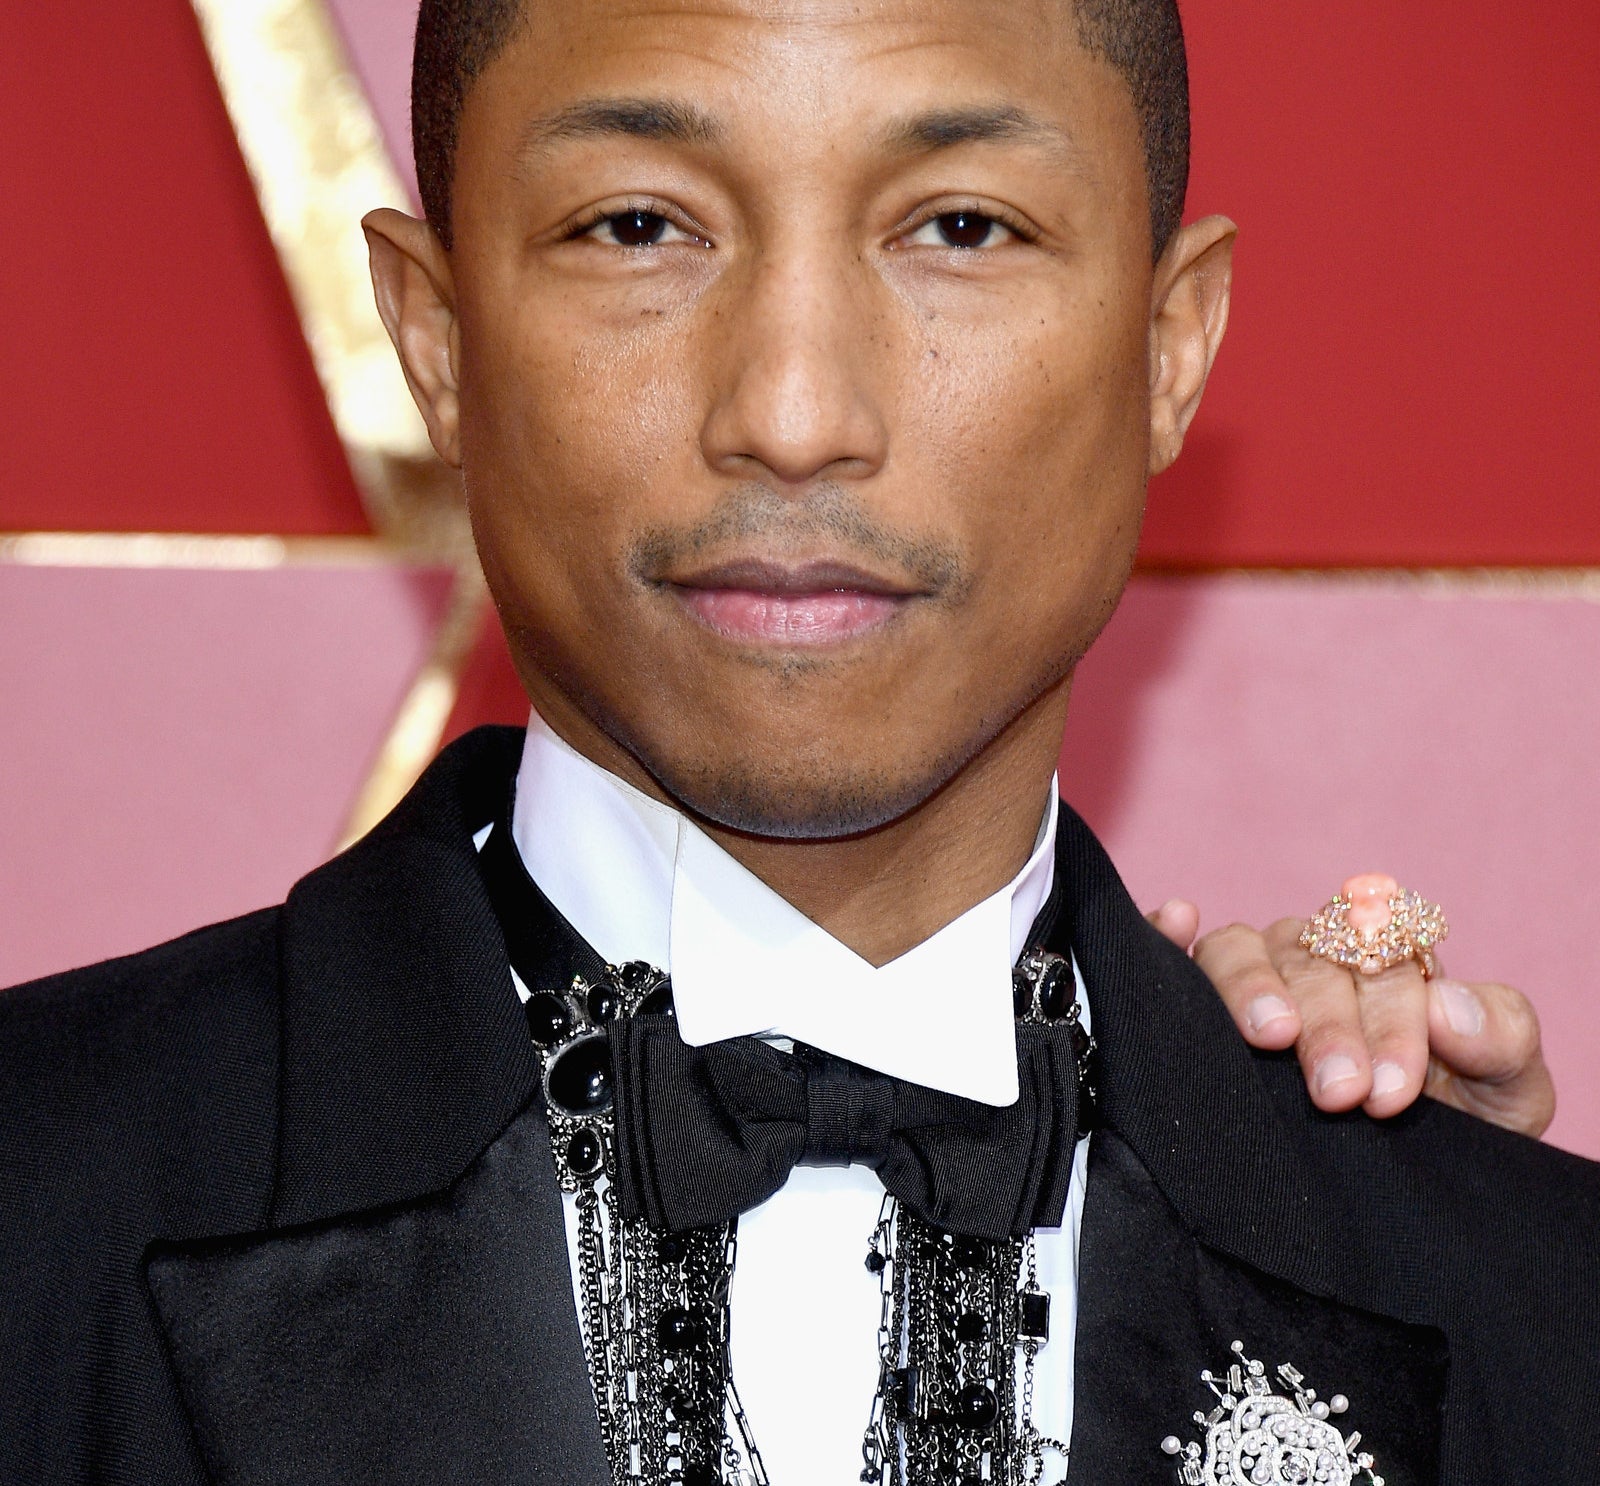 Pharrell Williams is cool but is his wife Helen Lasichanh cooler